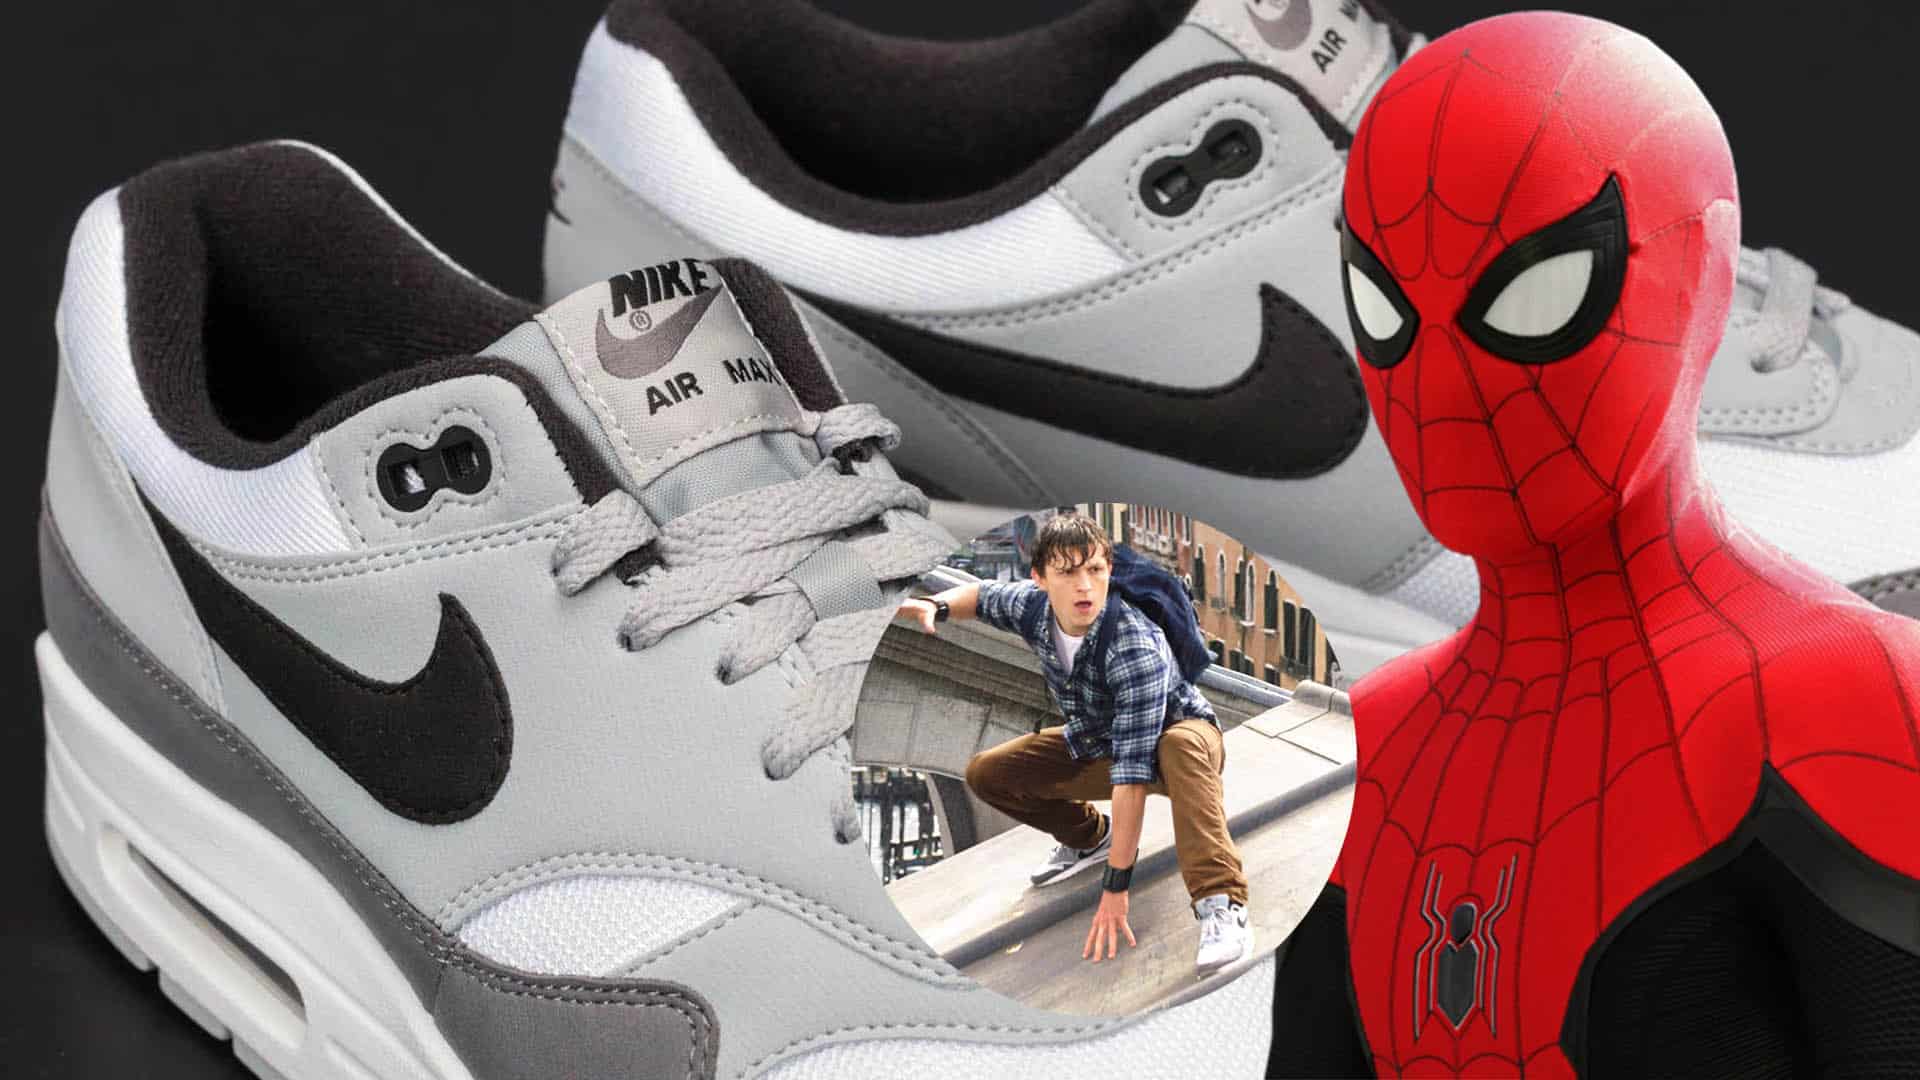 Peter Parker Wears Nike Air Max 1 Sneakers In Spider-Man: Far From Home |  Fortress of Solitude